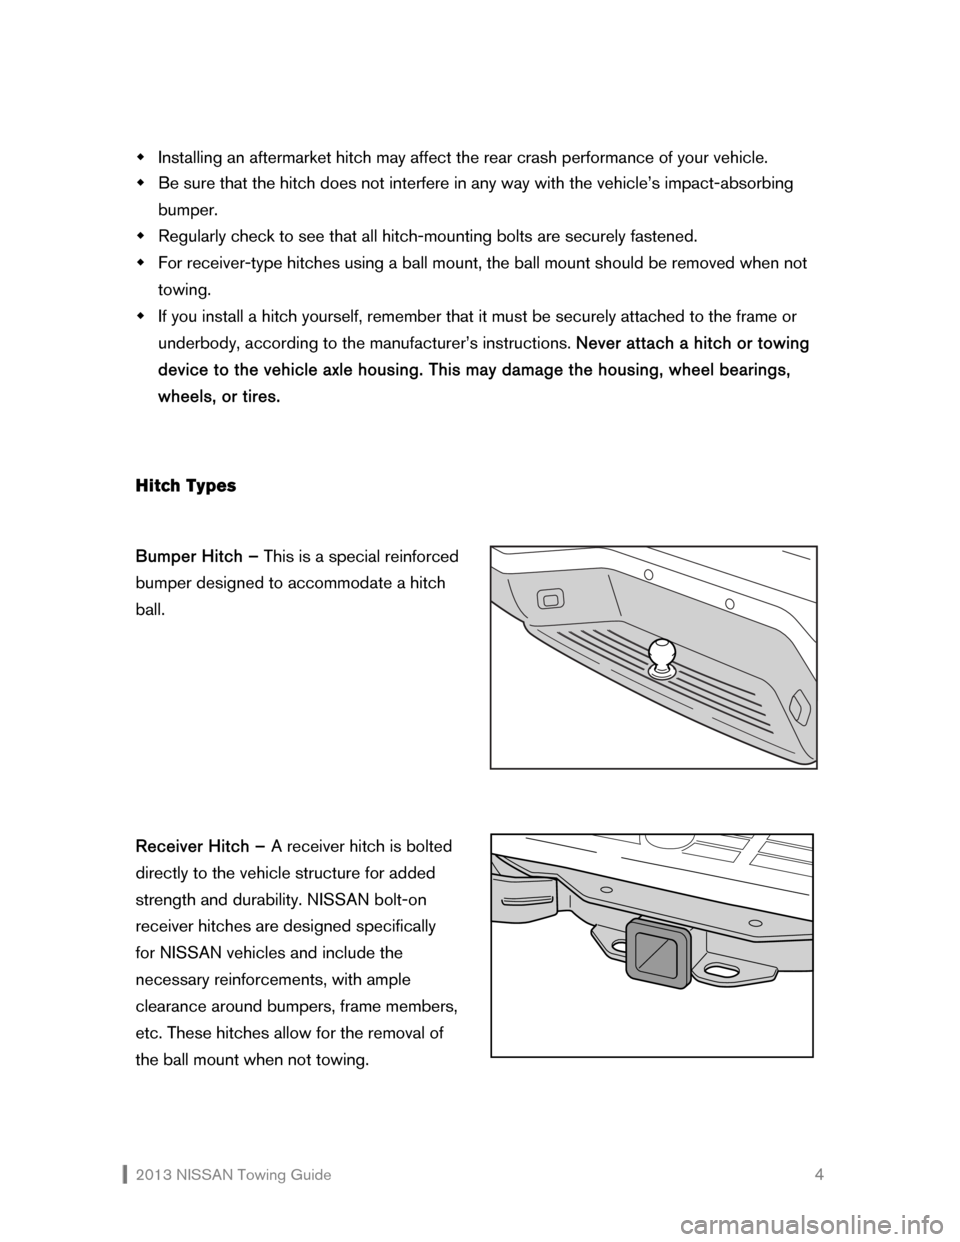 NISSAN 370Z ROADSTER 2013 Z34 Towing Guide  2013 NISSAN Towing Guide    4  Š Installing an aftermarket hitch may affect the rear crash performance of your vehicle. 
 Š Be sure that the hitch does not interfere in any way with the vehicle’s